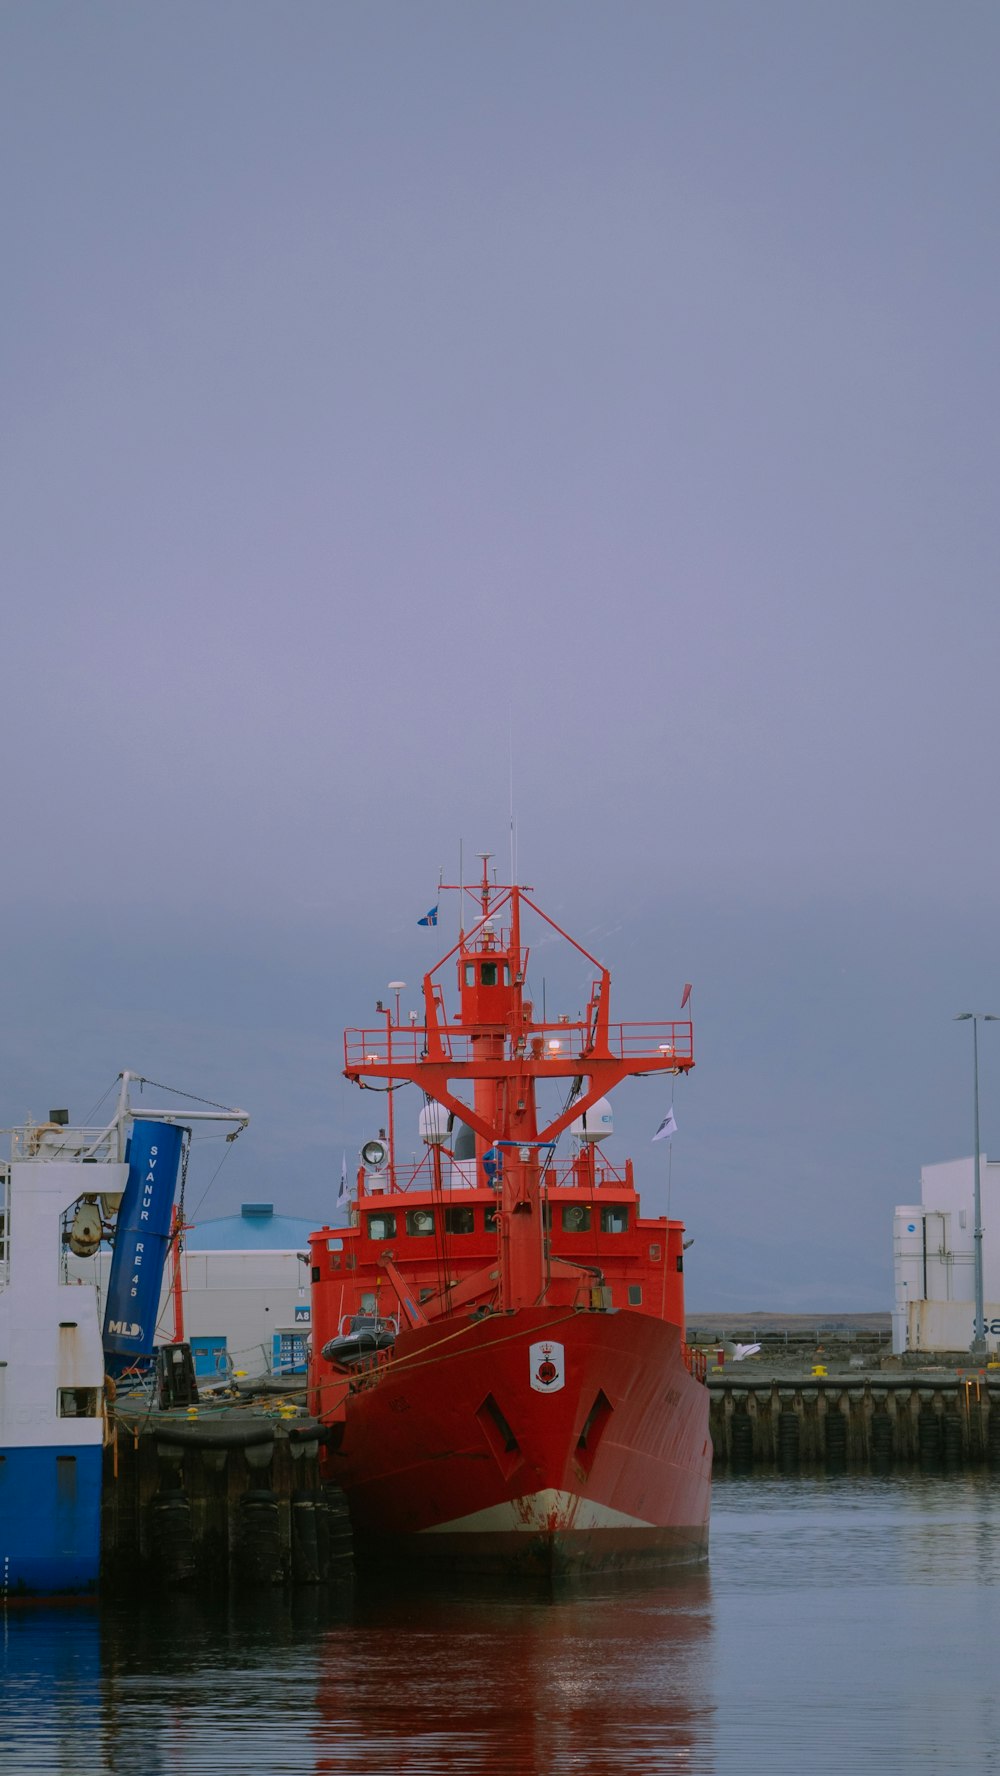 a red boat in the water